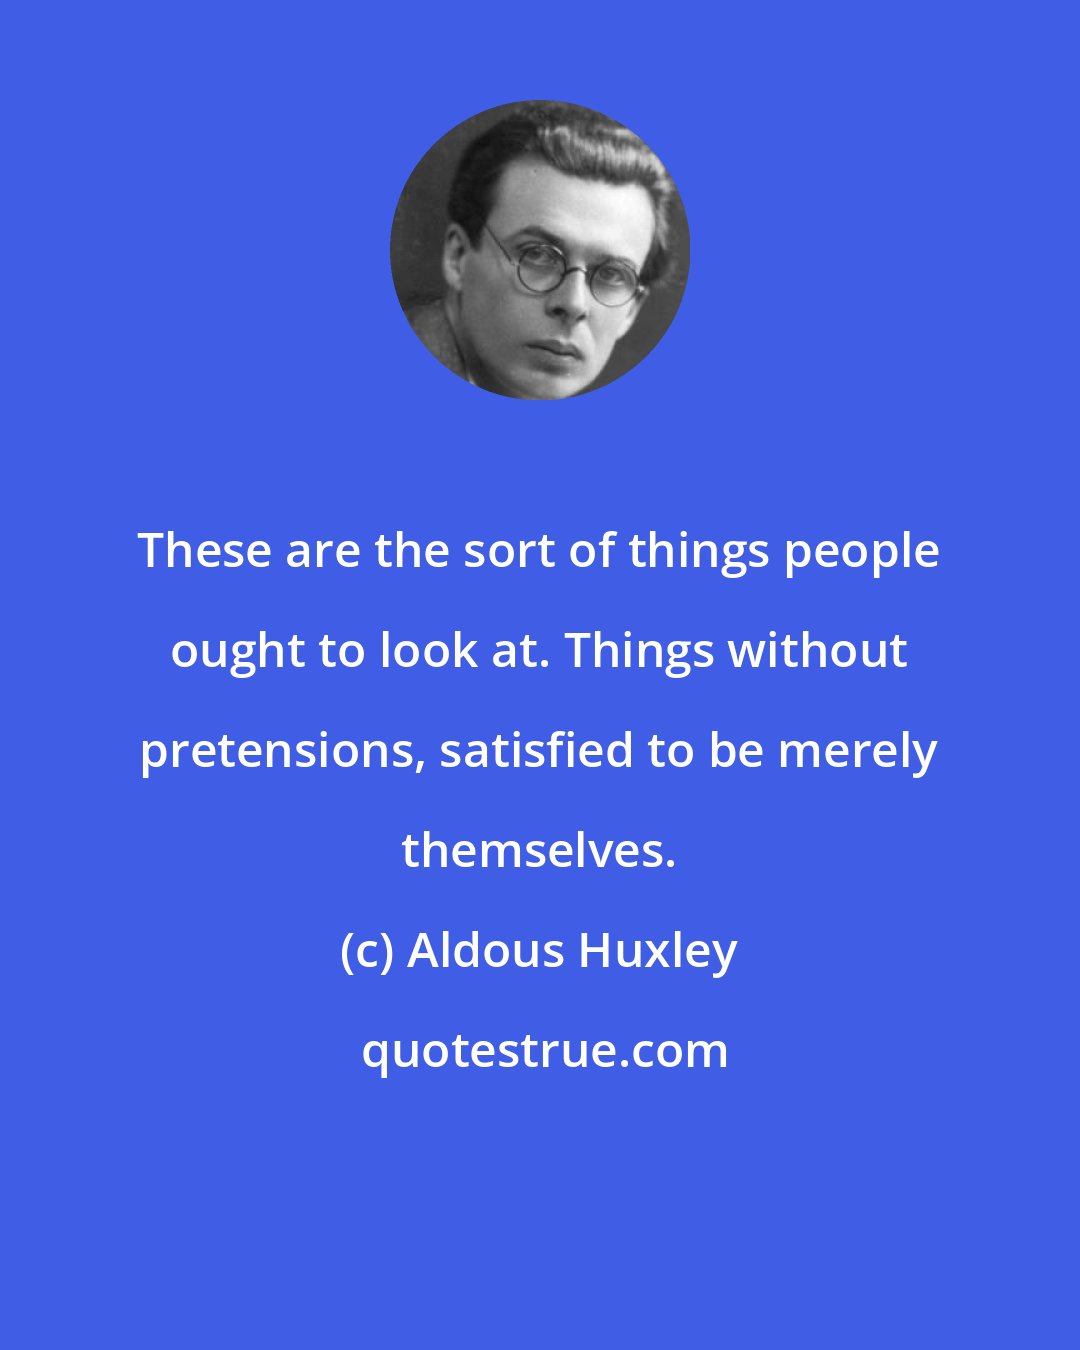 Aldous Huxley: These are the sort of things people ought to look at. Things without pretensions, satisfied to be merely themselves.